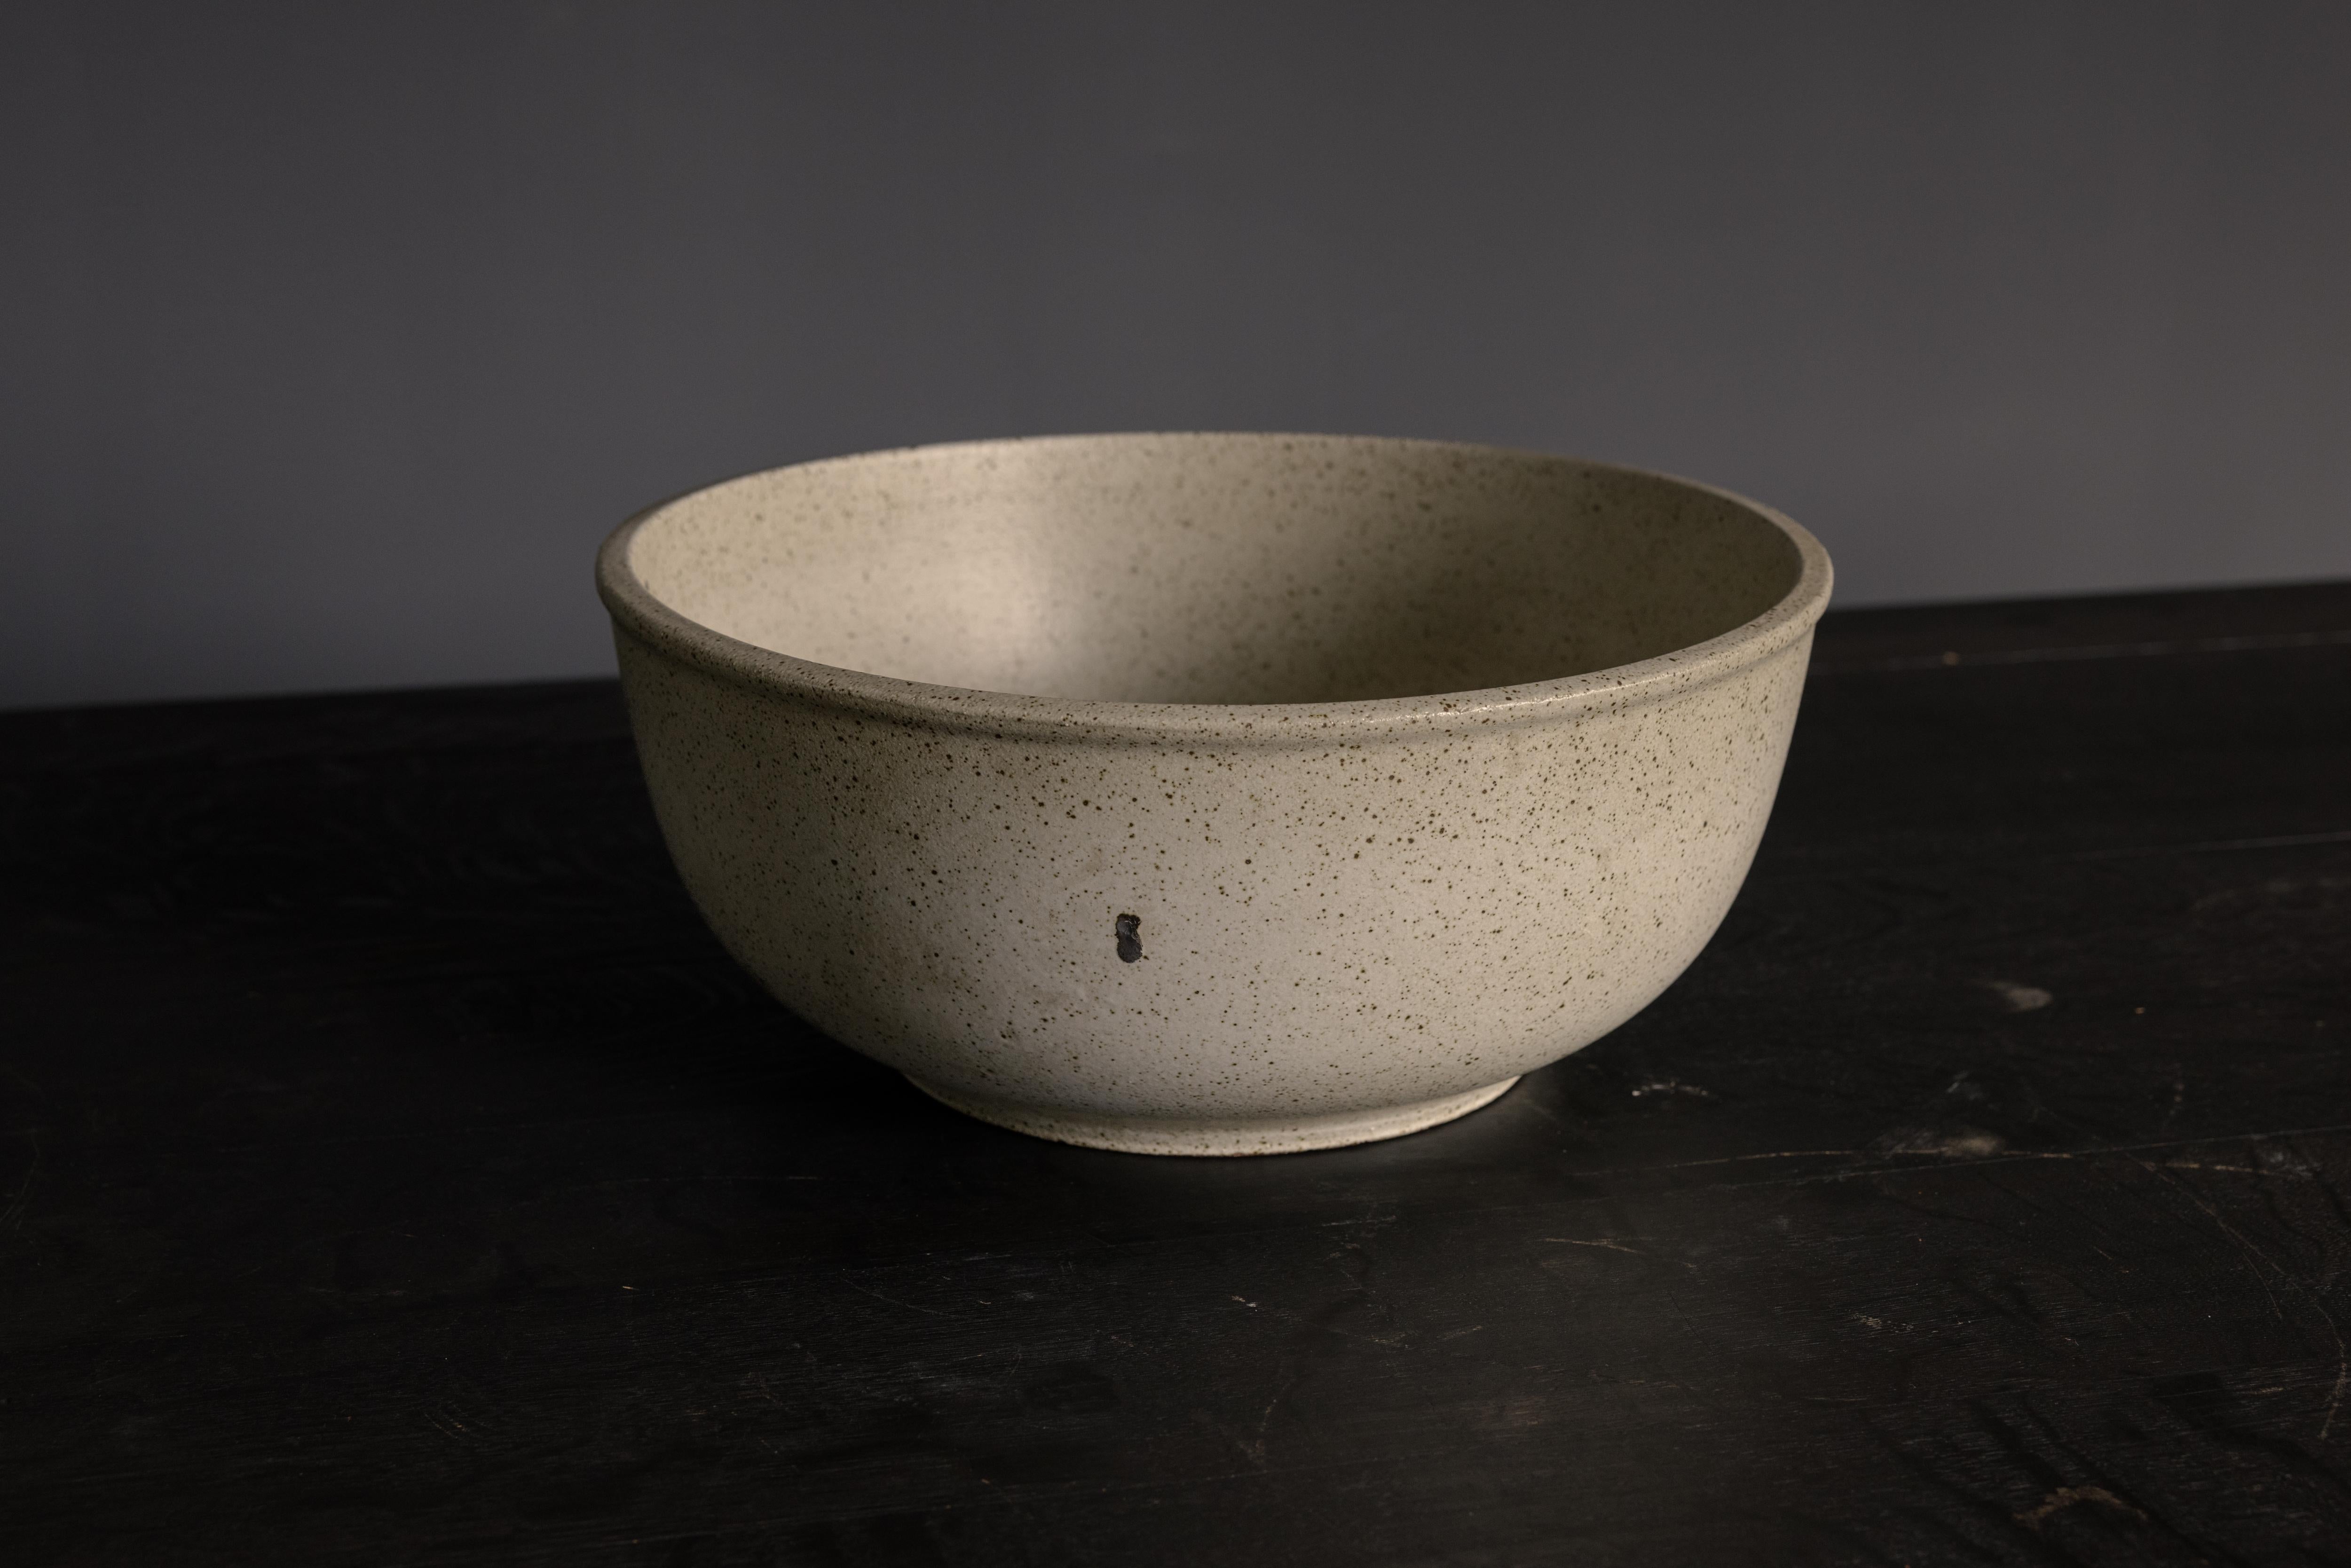 Large Speckled Bowl for Terra Major Gourmet Ware by David Cressey, Architectural Pottery, c. 1970's, USA
Glazed Stone White

H 7.5